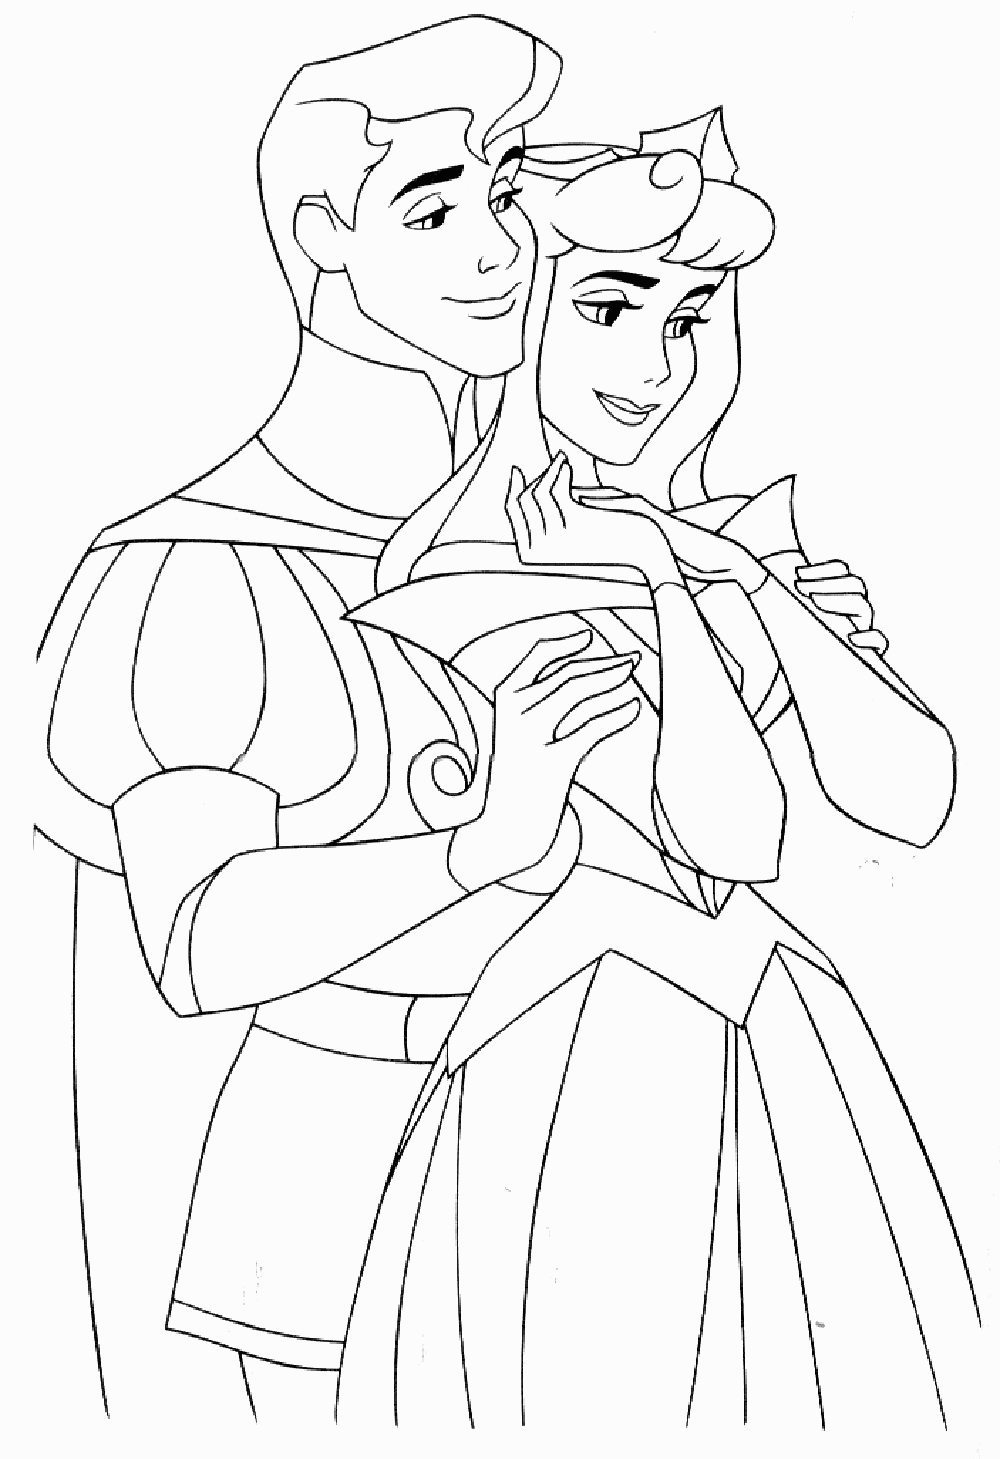 Sleeping Beauty coloring pages to print for kids Sleeping beauty Kids